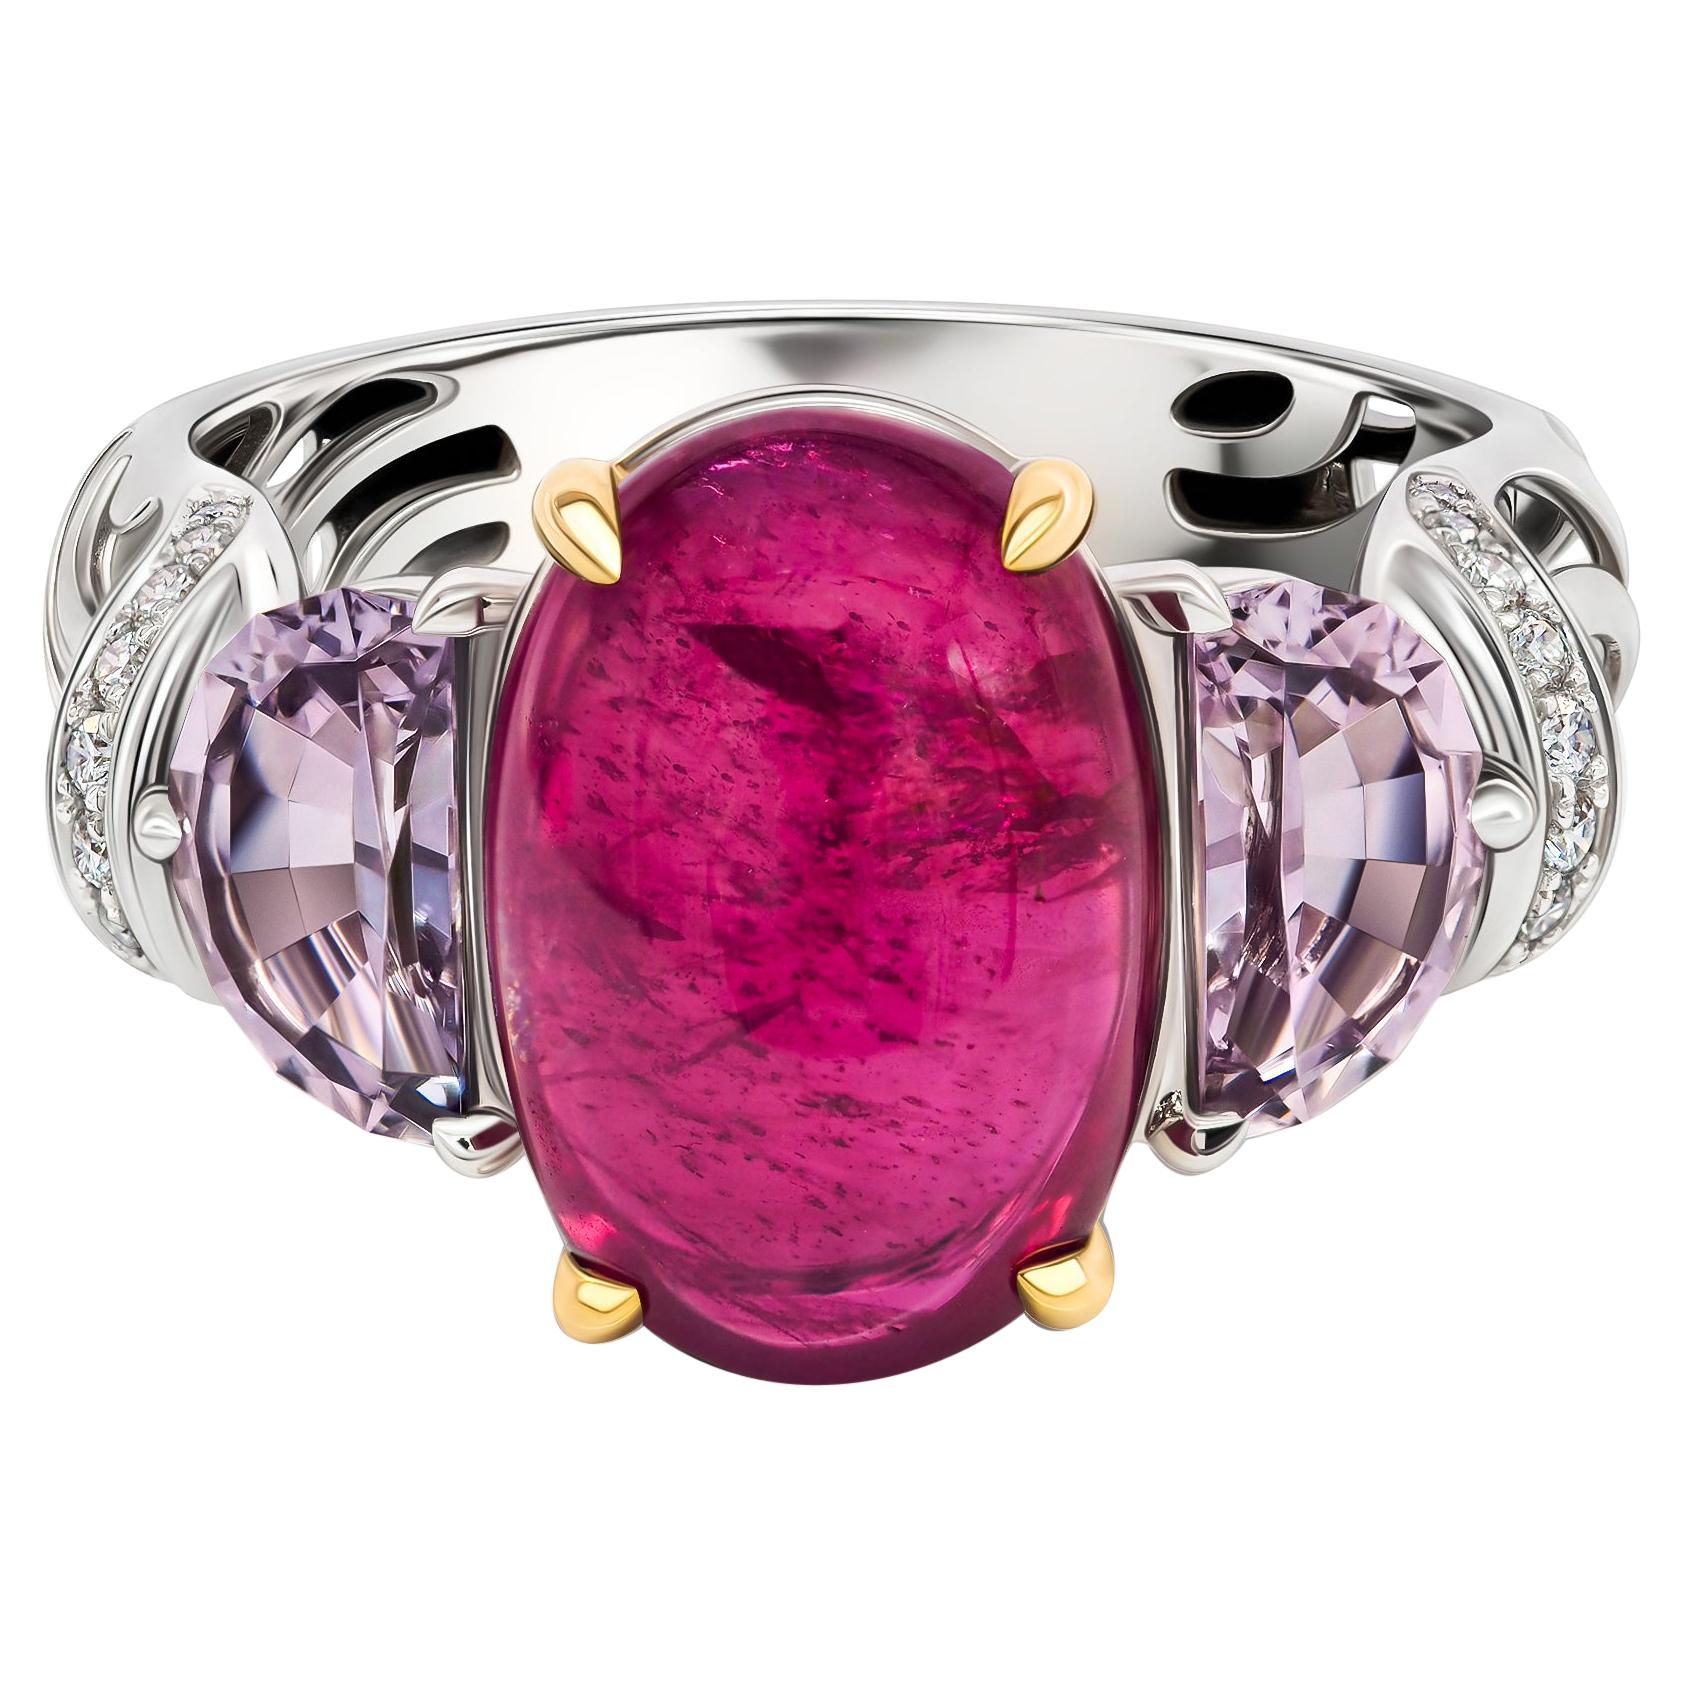 Unheated Ruby Cabochon & Spinels Ring, 18K White Gold & Diamonds Ring For Sale